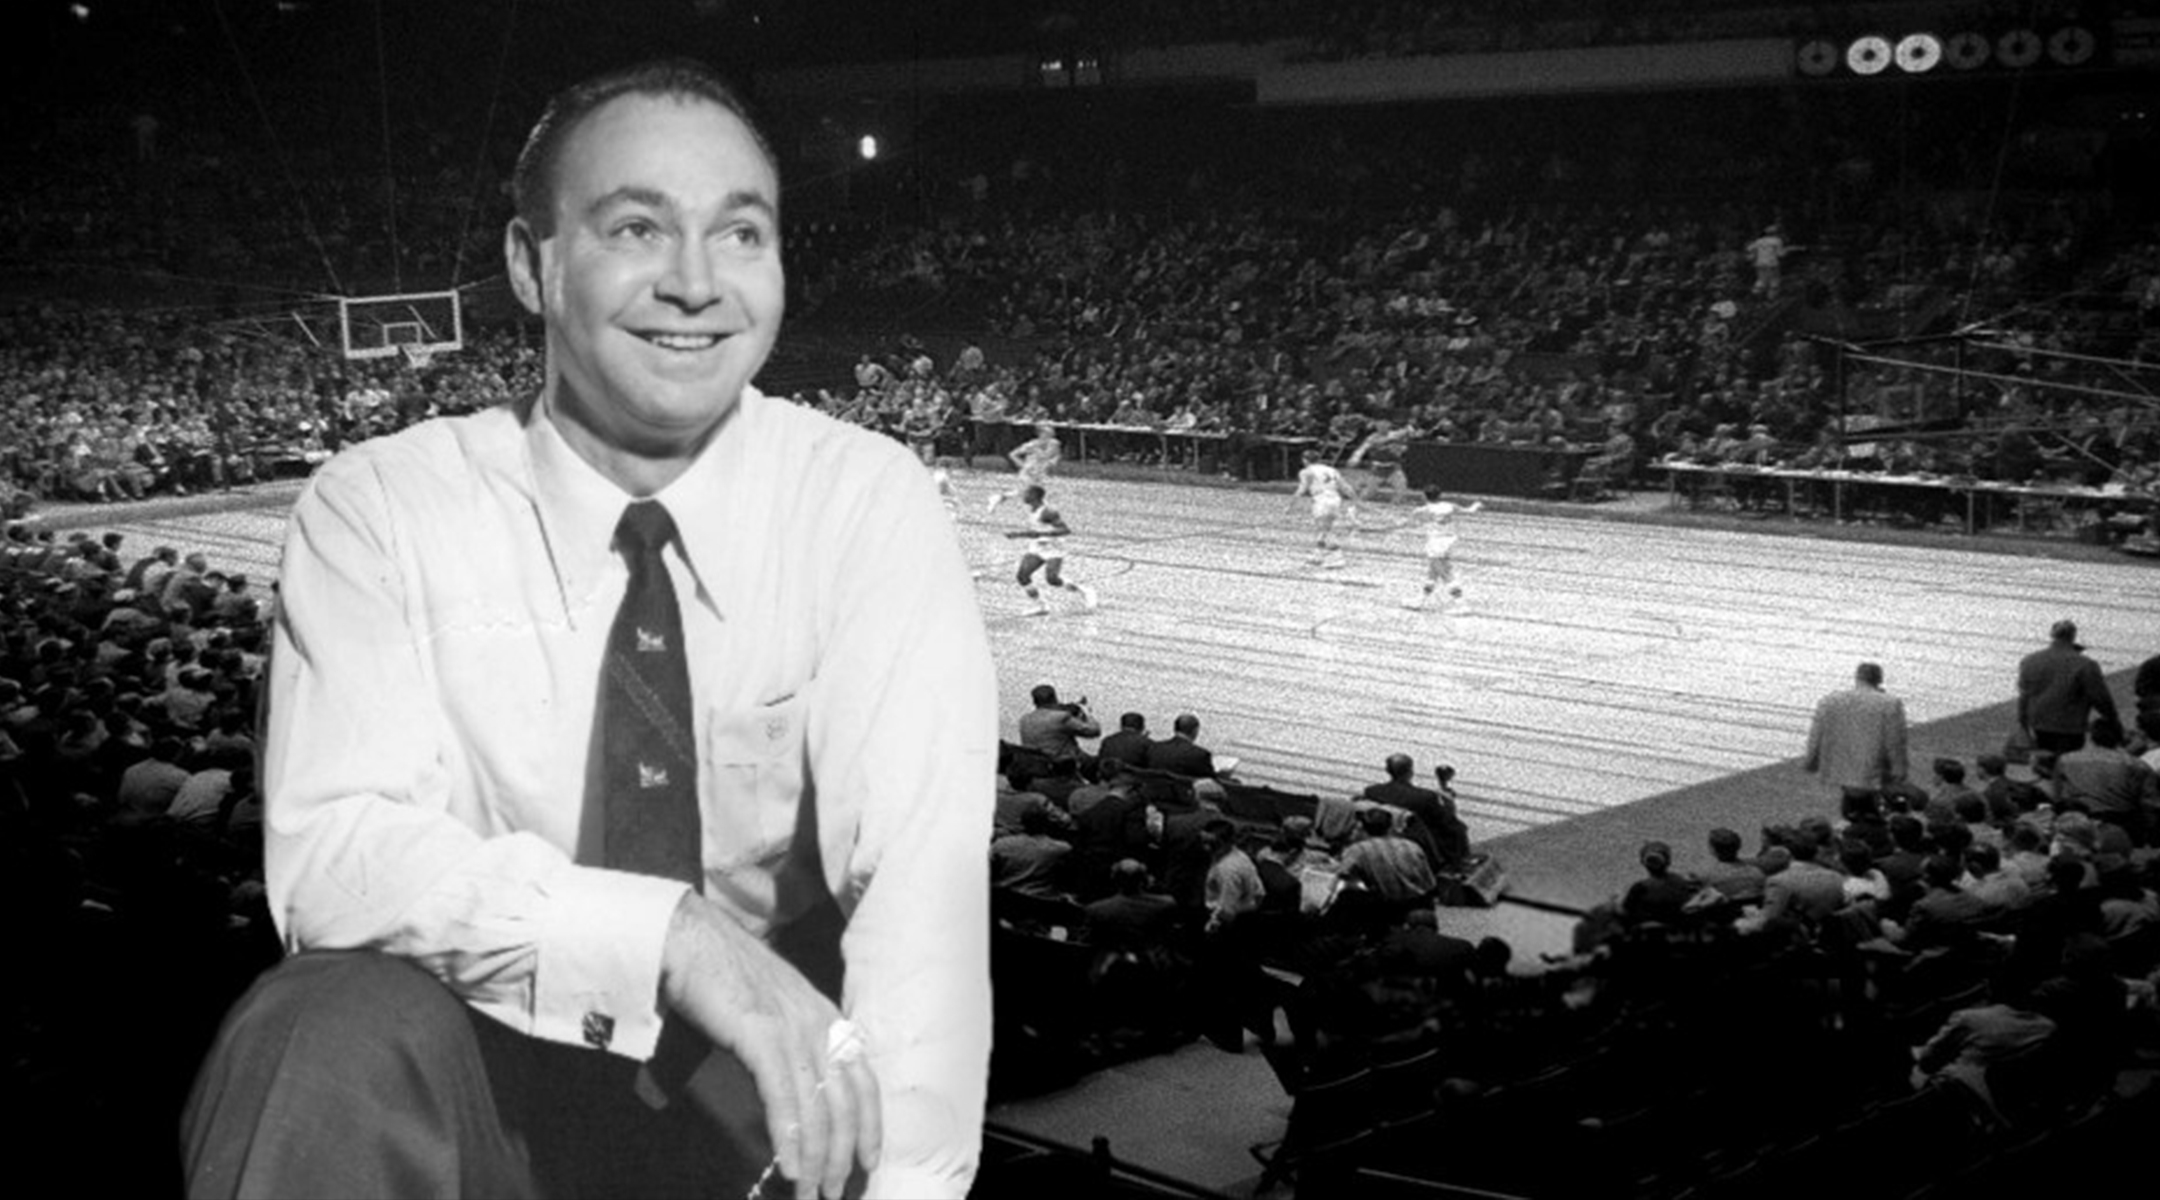 Marty Glickman in an undated photo at Madison Square Garden. (Sports Broadcast Journal)